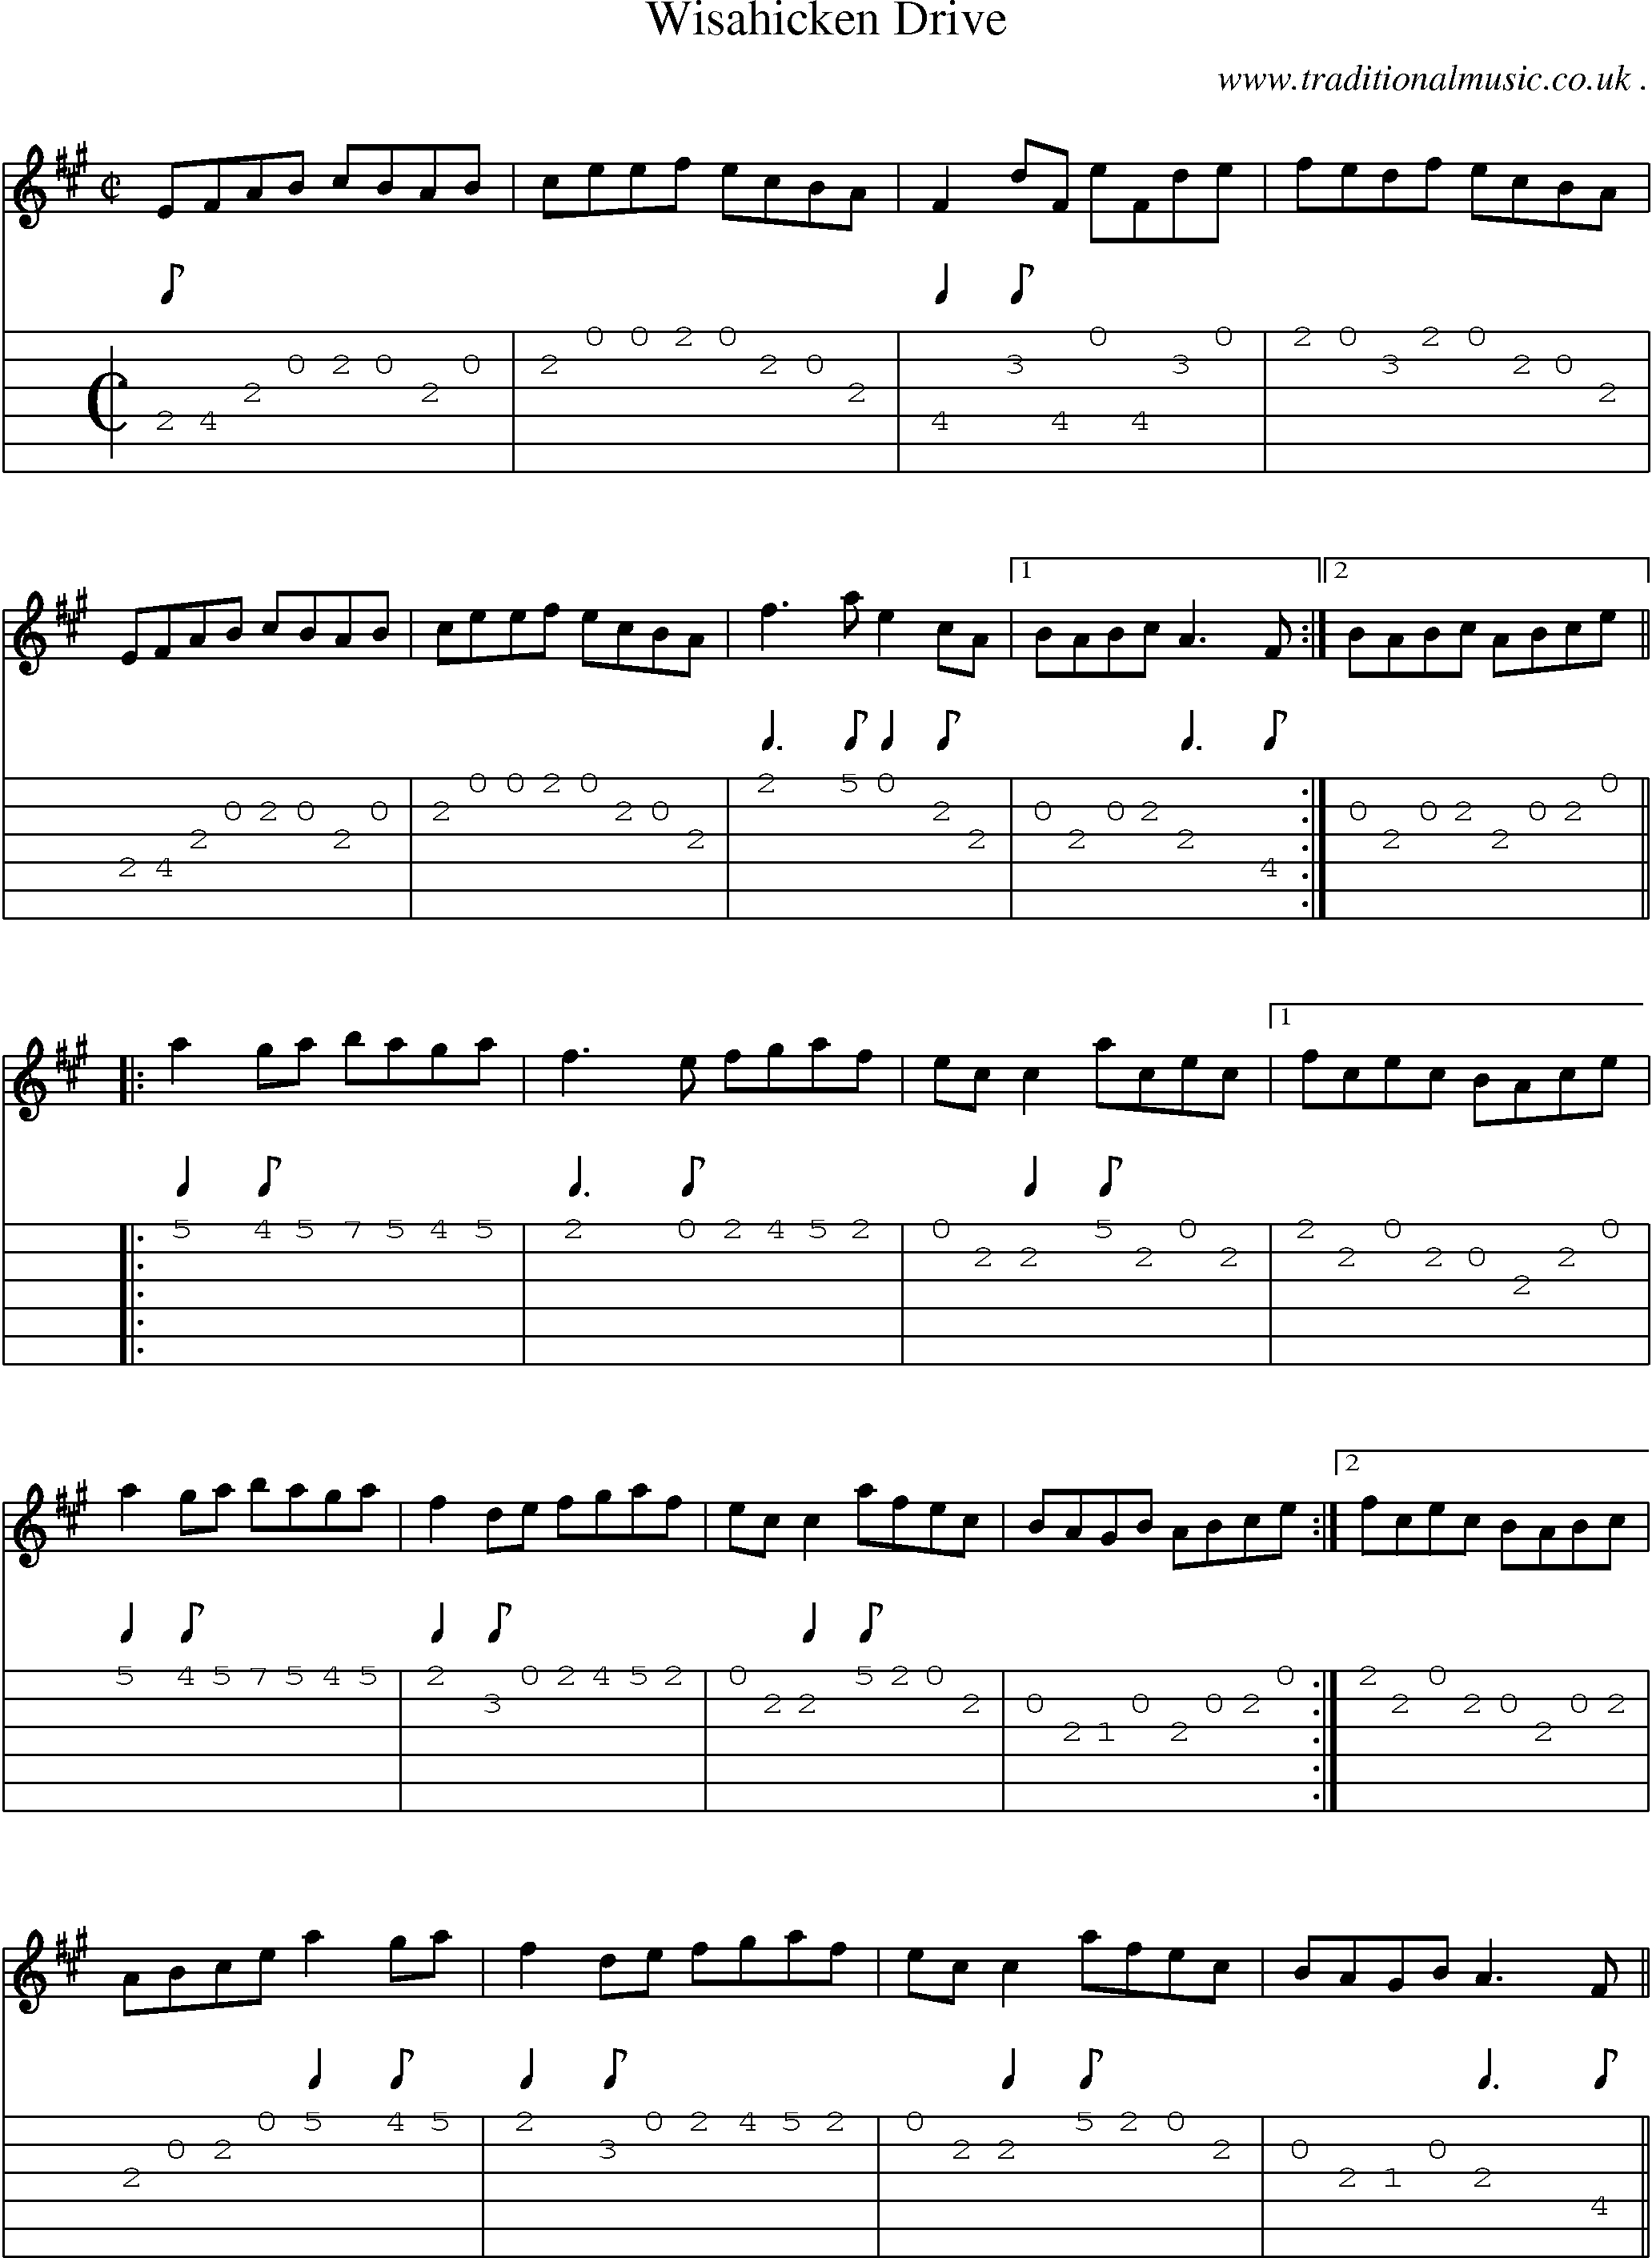 Sheet-Music and Guitar Tabs for Wisahicken Drive